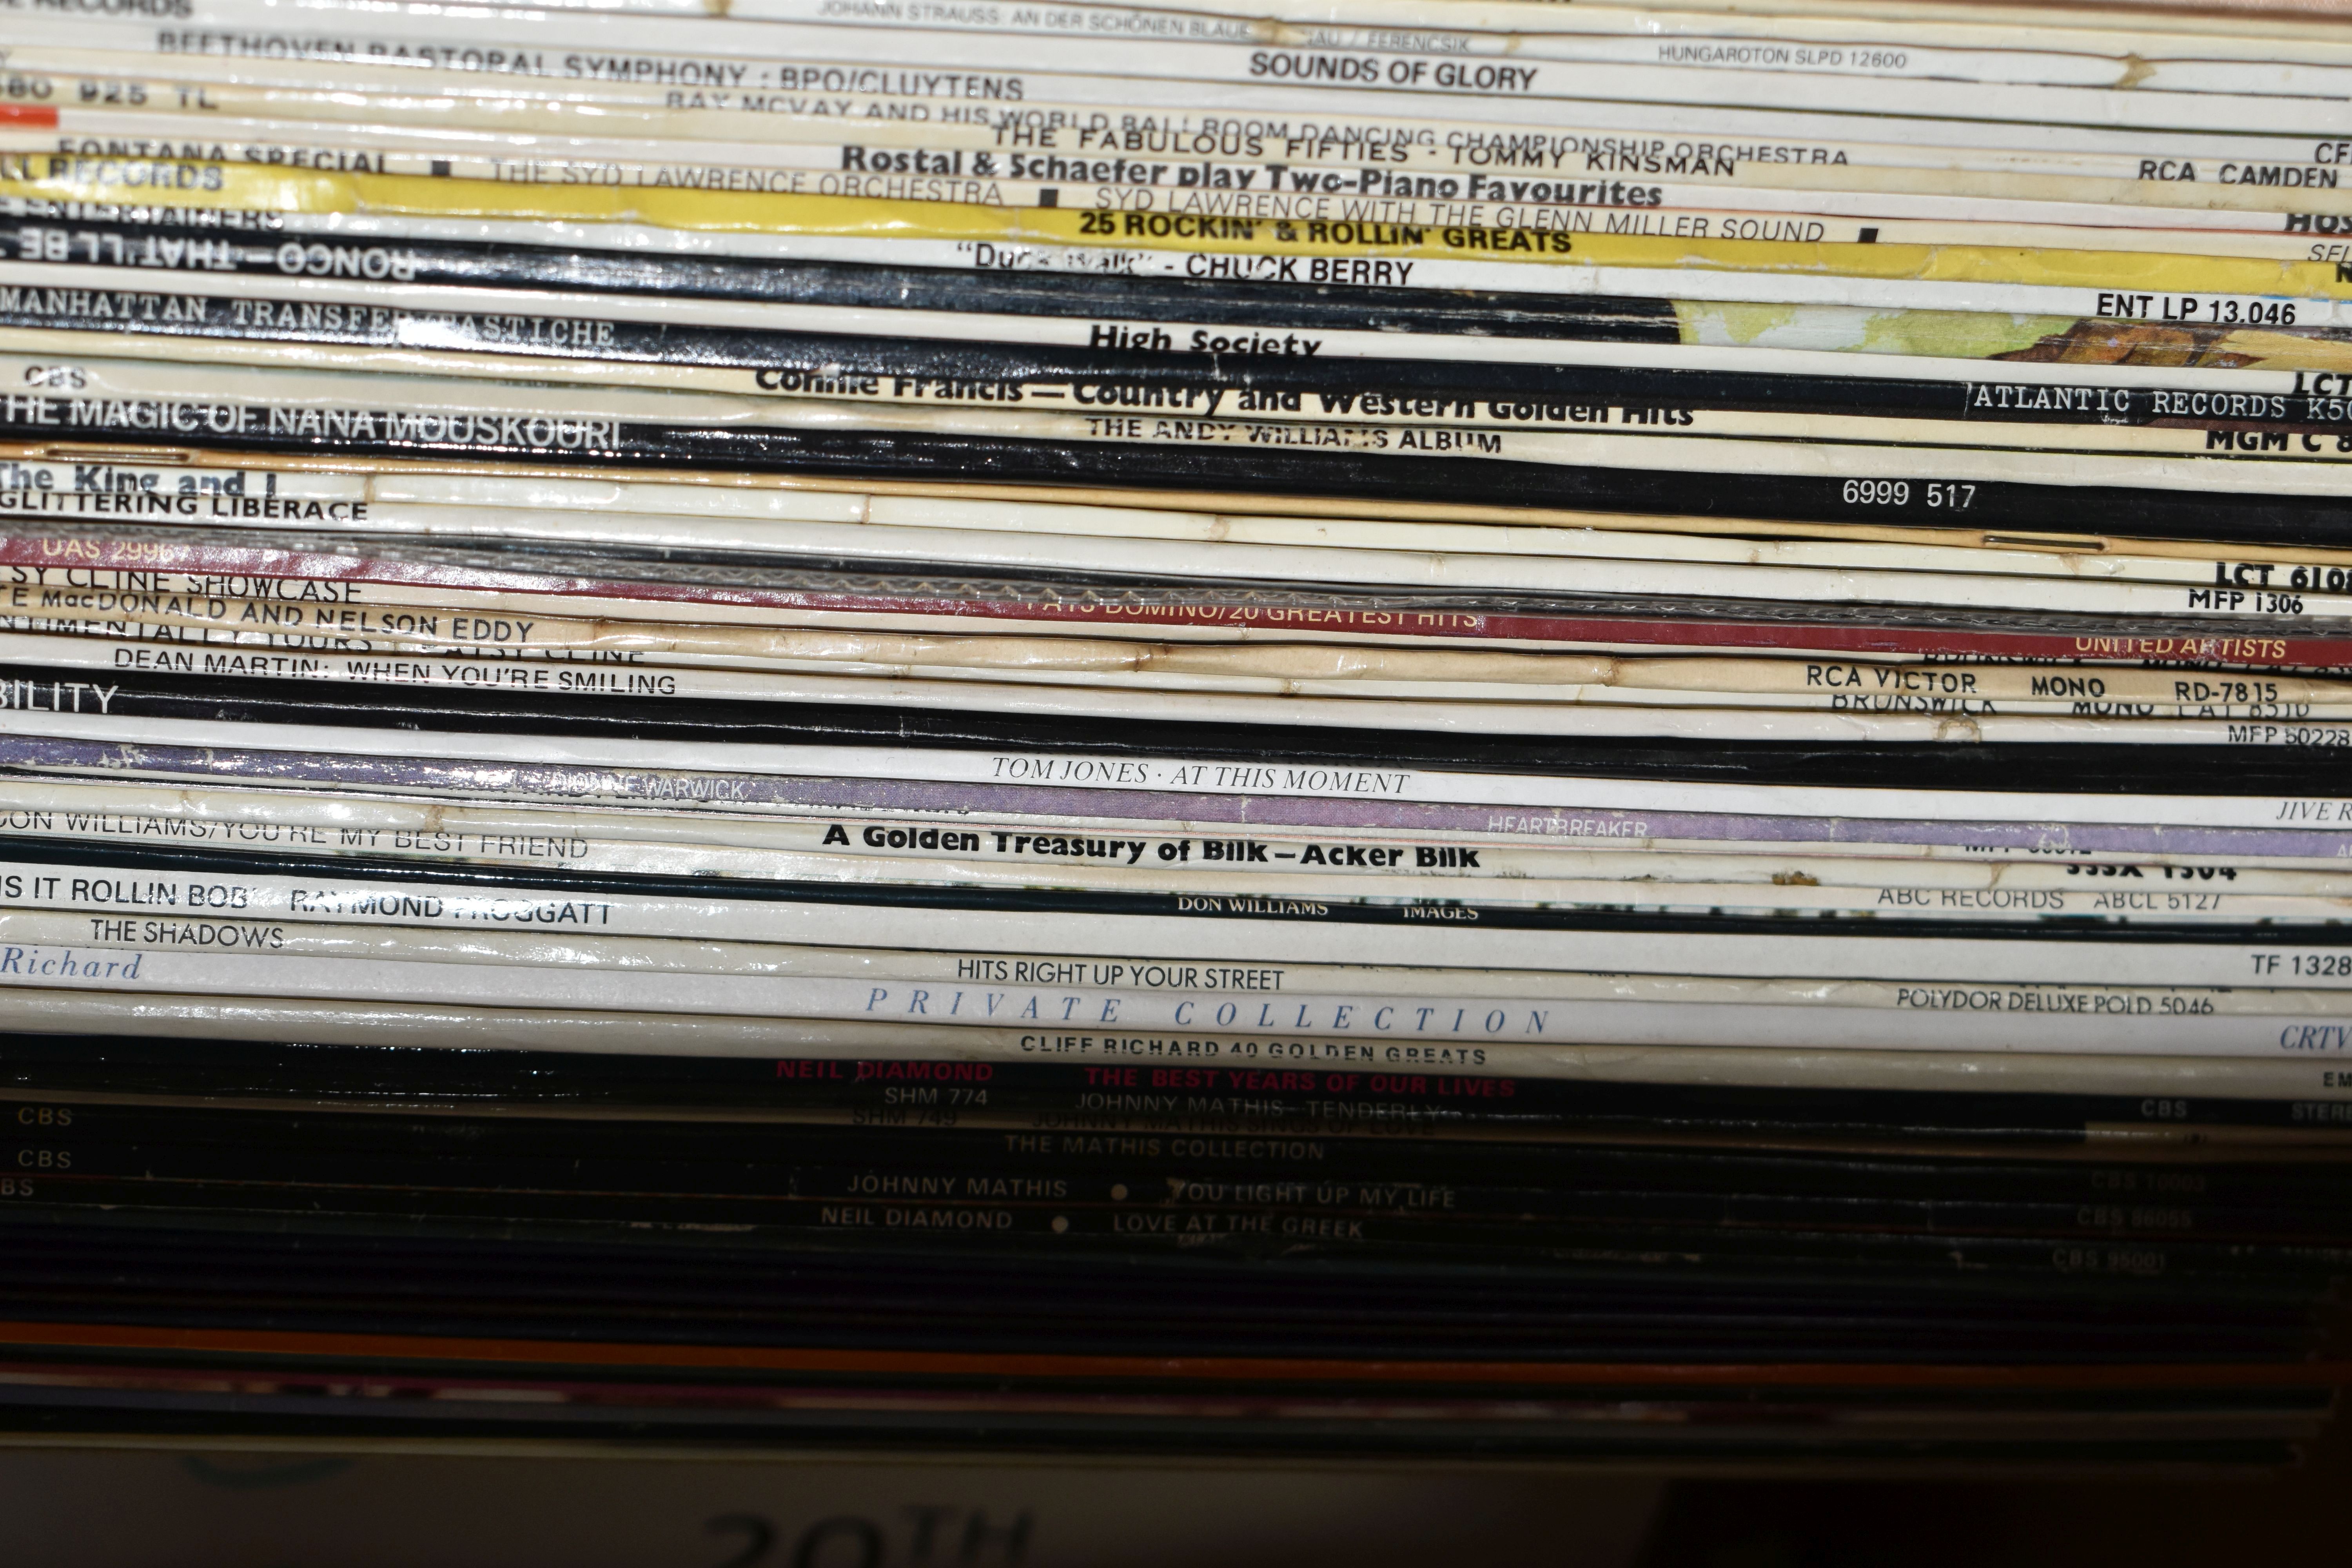 ONE BOX OF LP RECORDS, approximately seventy LP records, artists include Elvis, the Beatles 'Beatles - Image 4 of 4